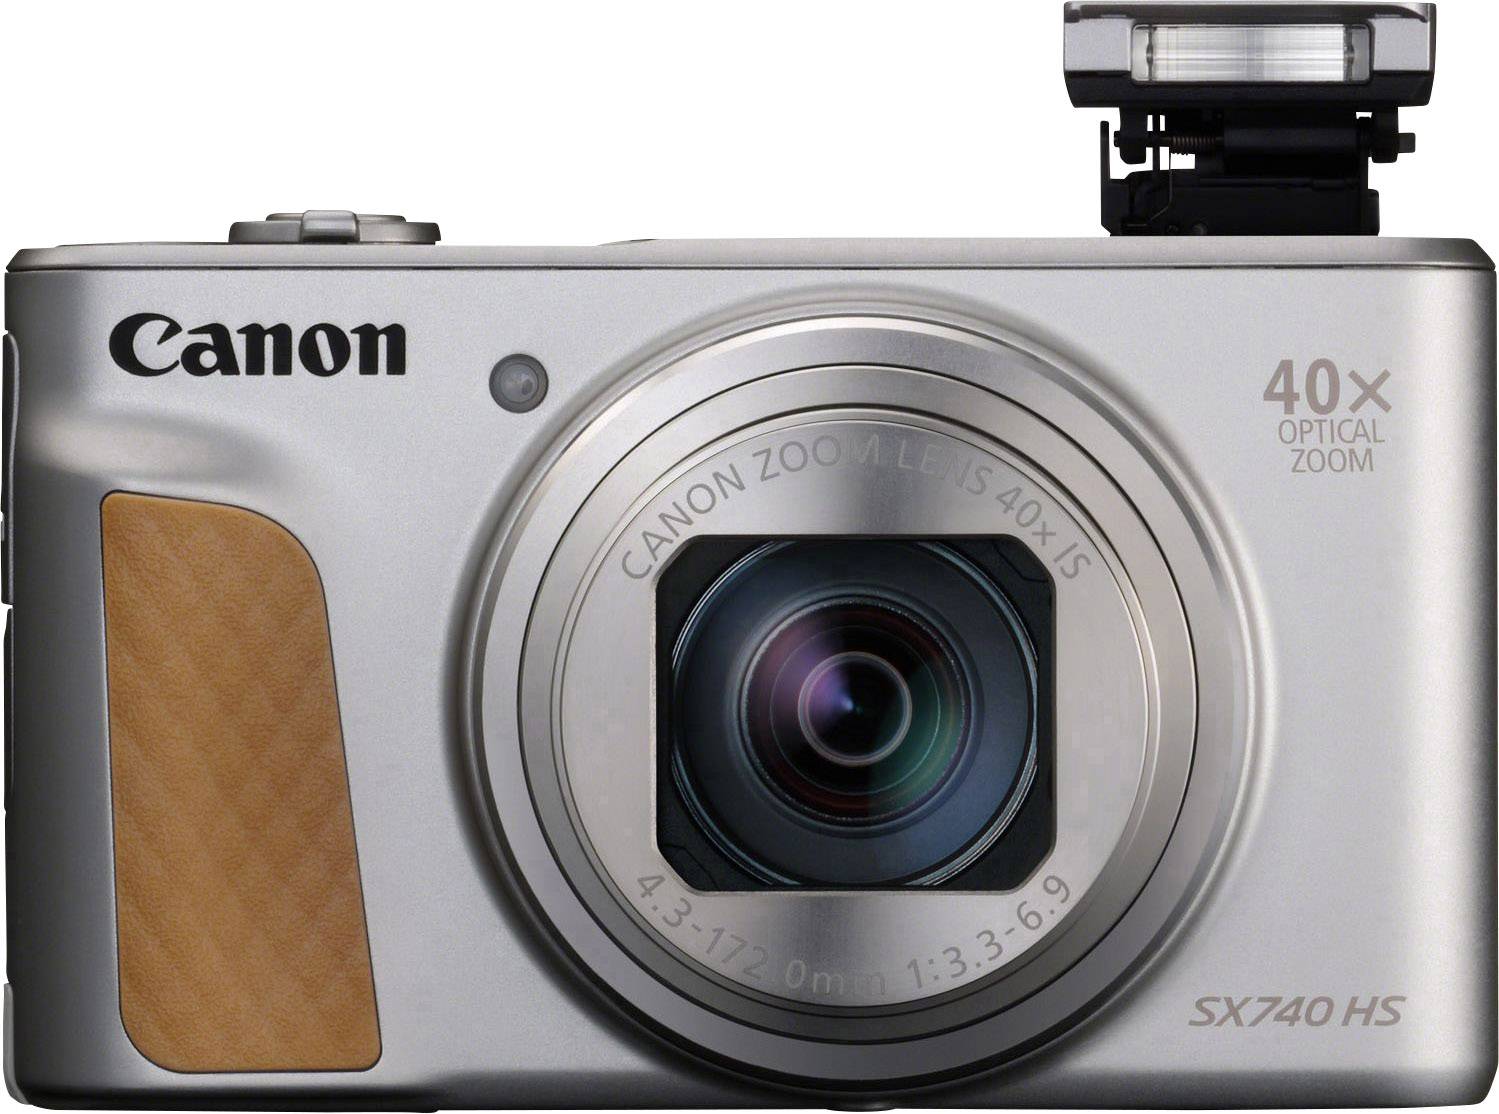 as Consequent roze Canon PowerShot SX740 HS Digital camera 20.3 MP Optical zoom: 40 x Silver 4k  video, Bluetooth, Pivoted display, Full HD | Conrad.com